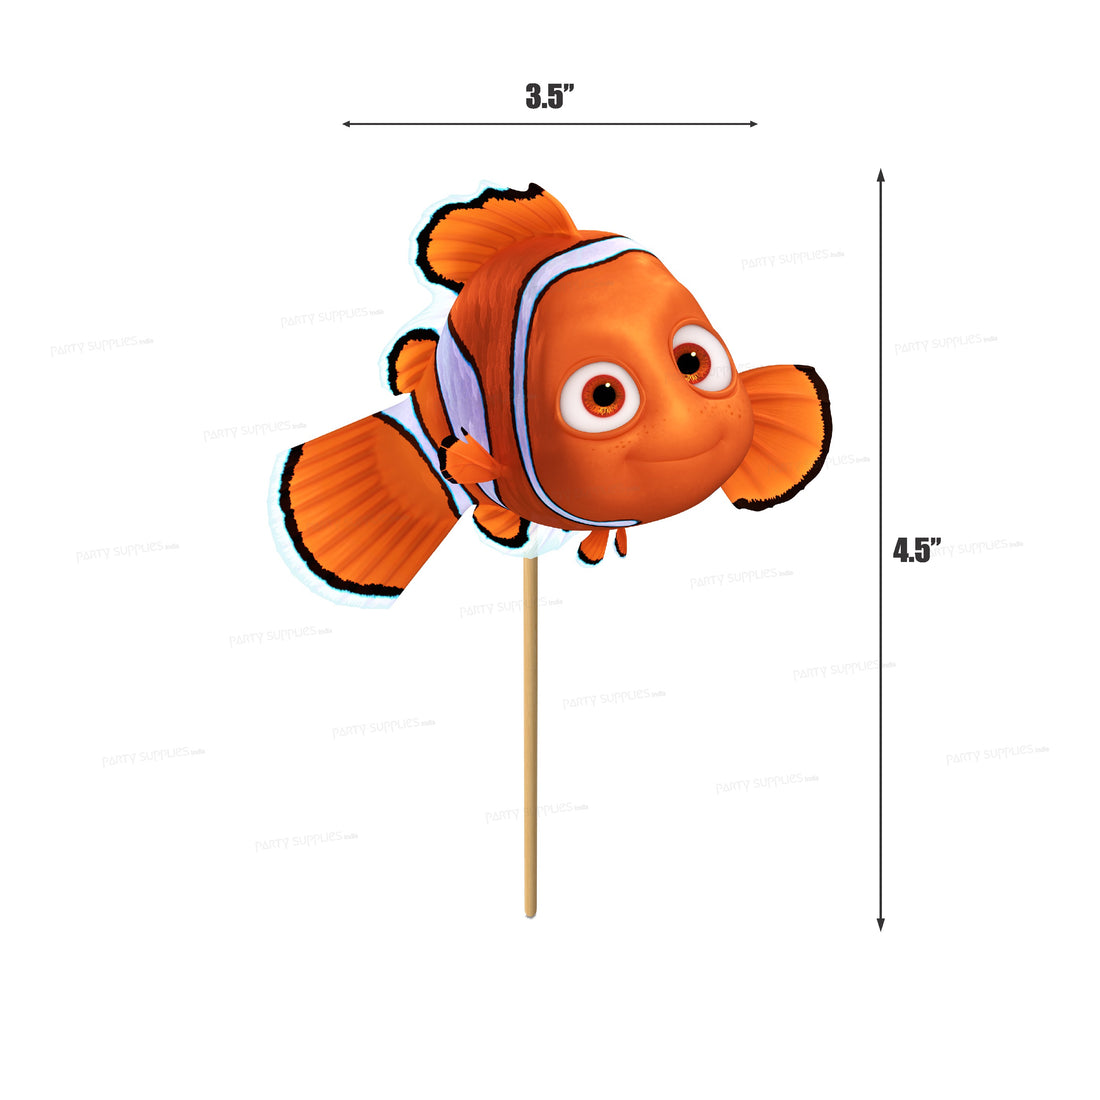 PSI Nemo and Dory Theme Cup Cake Topper